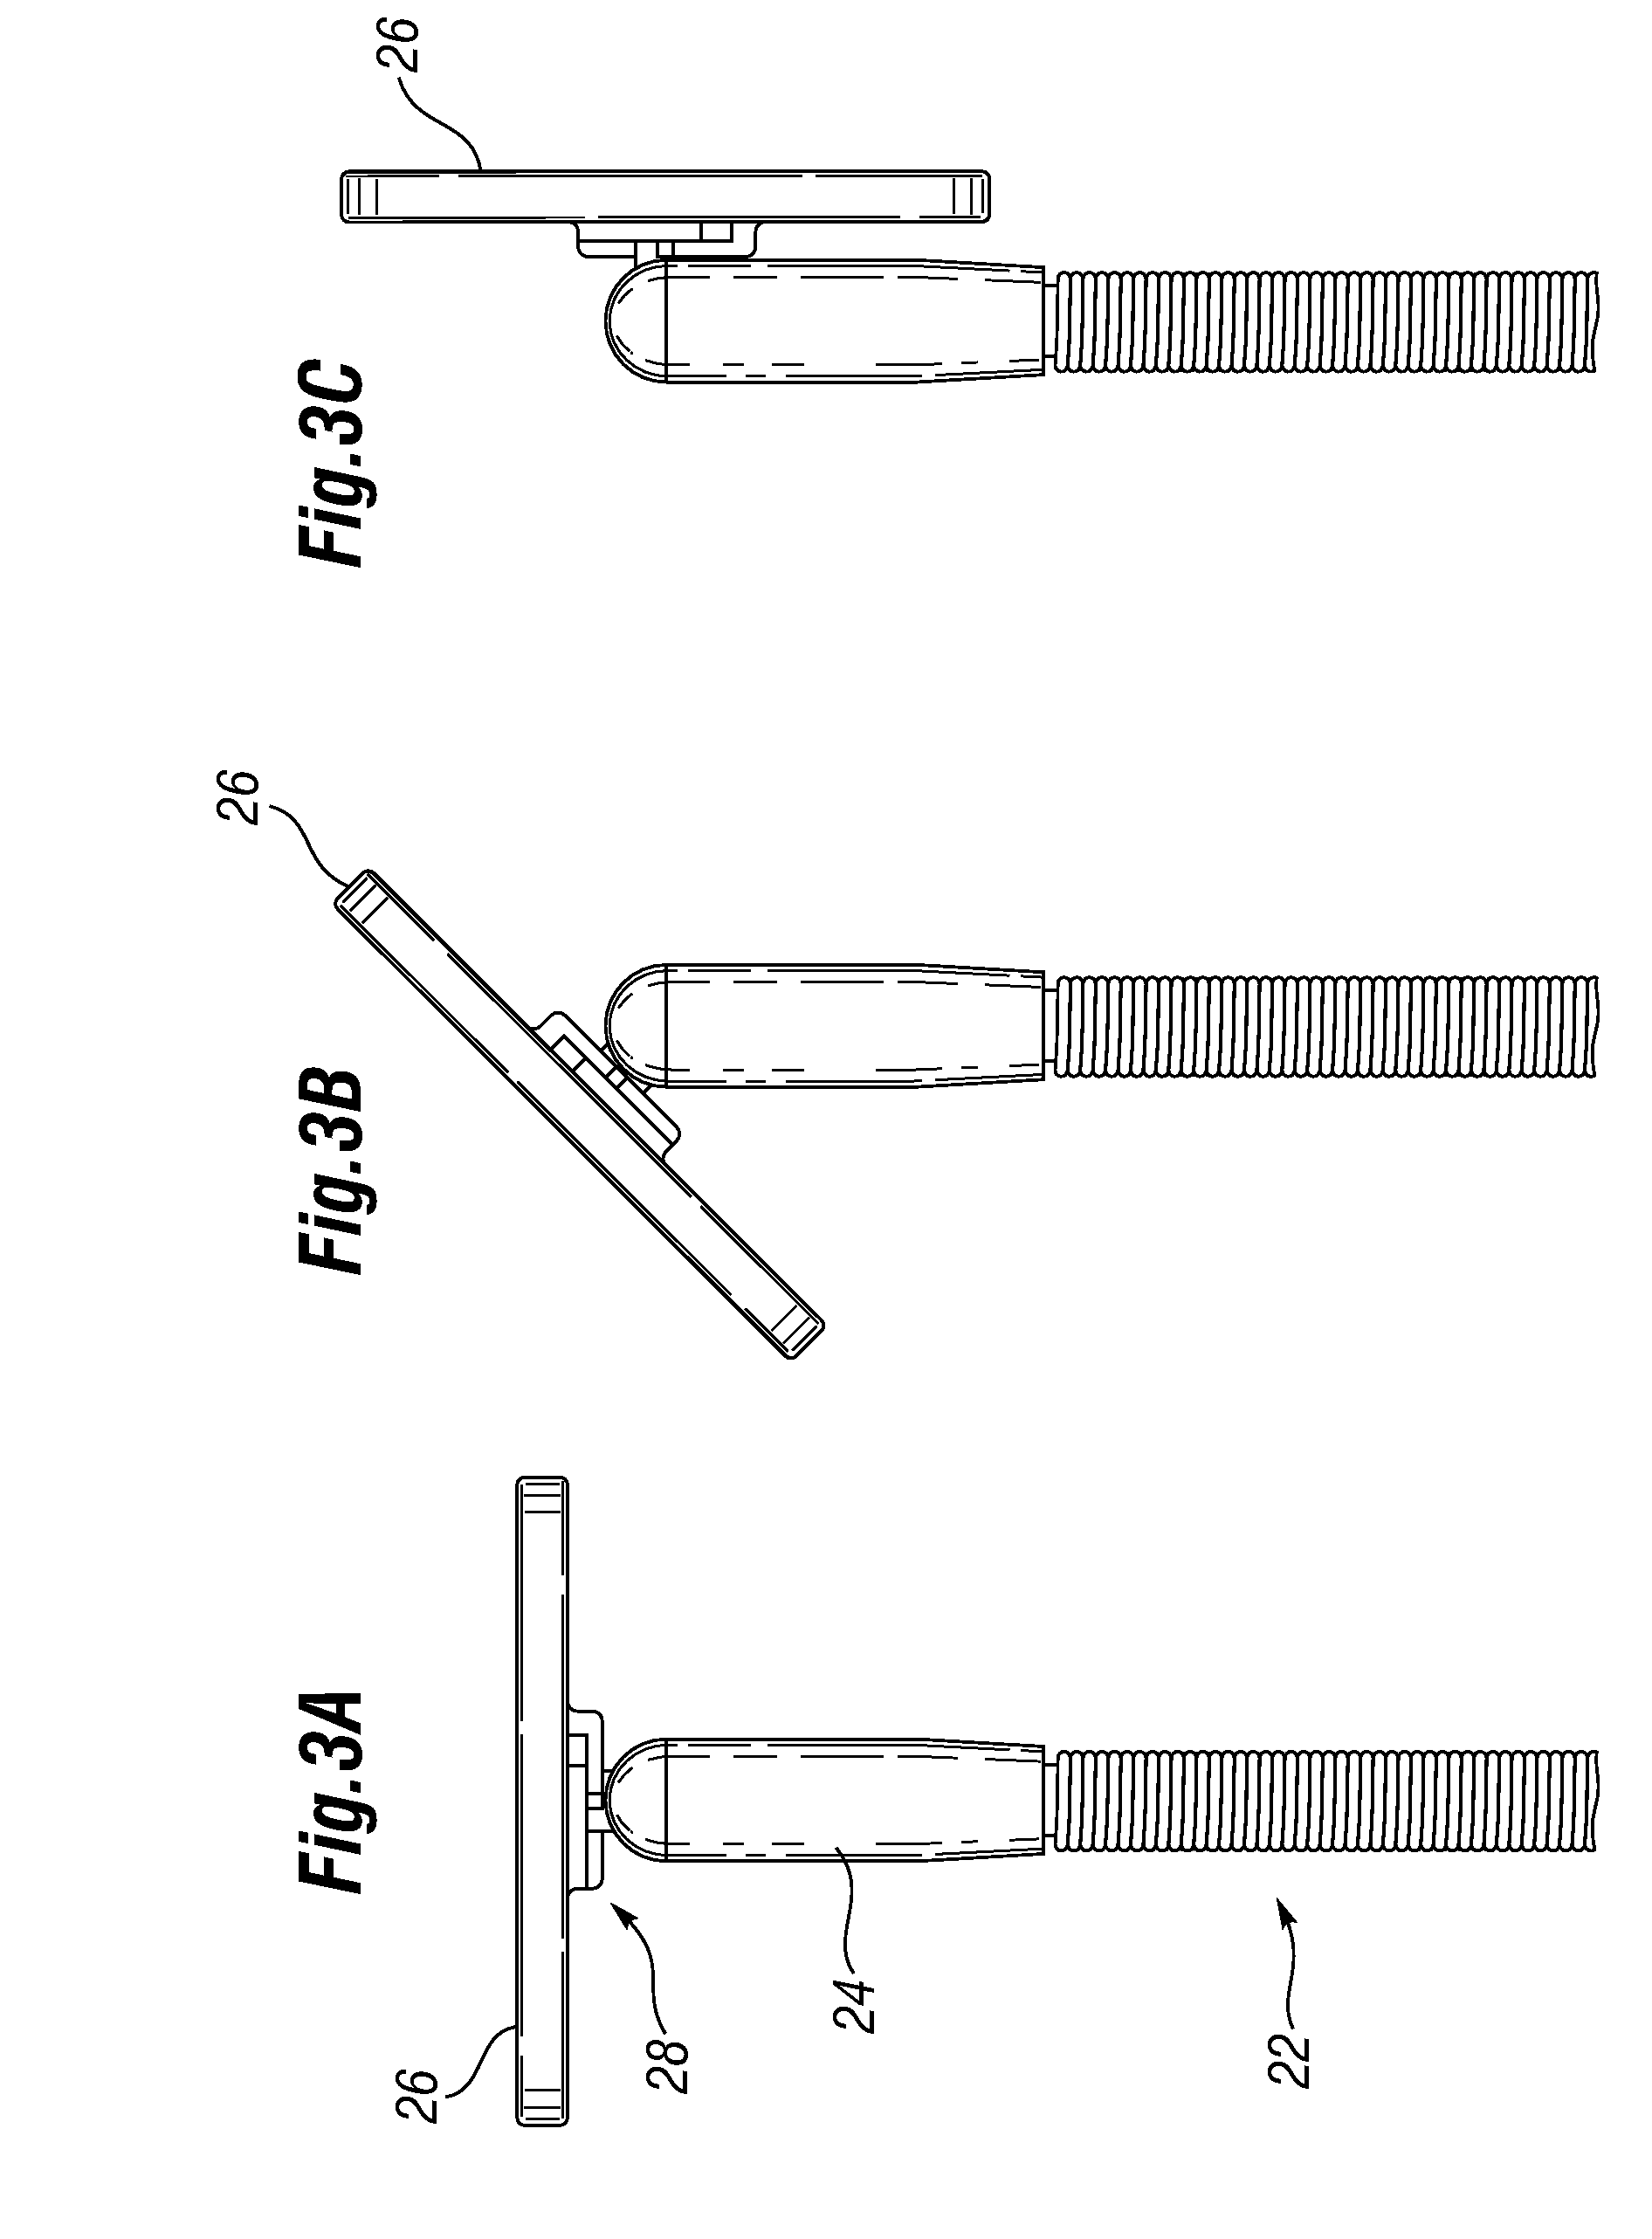 Active holder for annuloplasty ring delivery